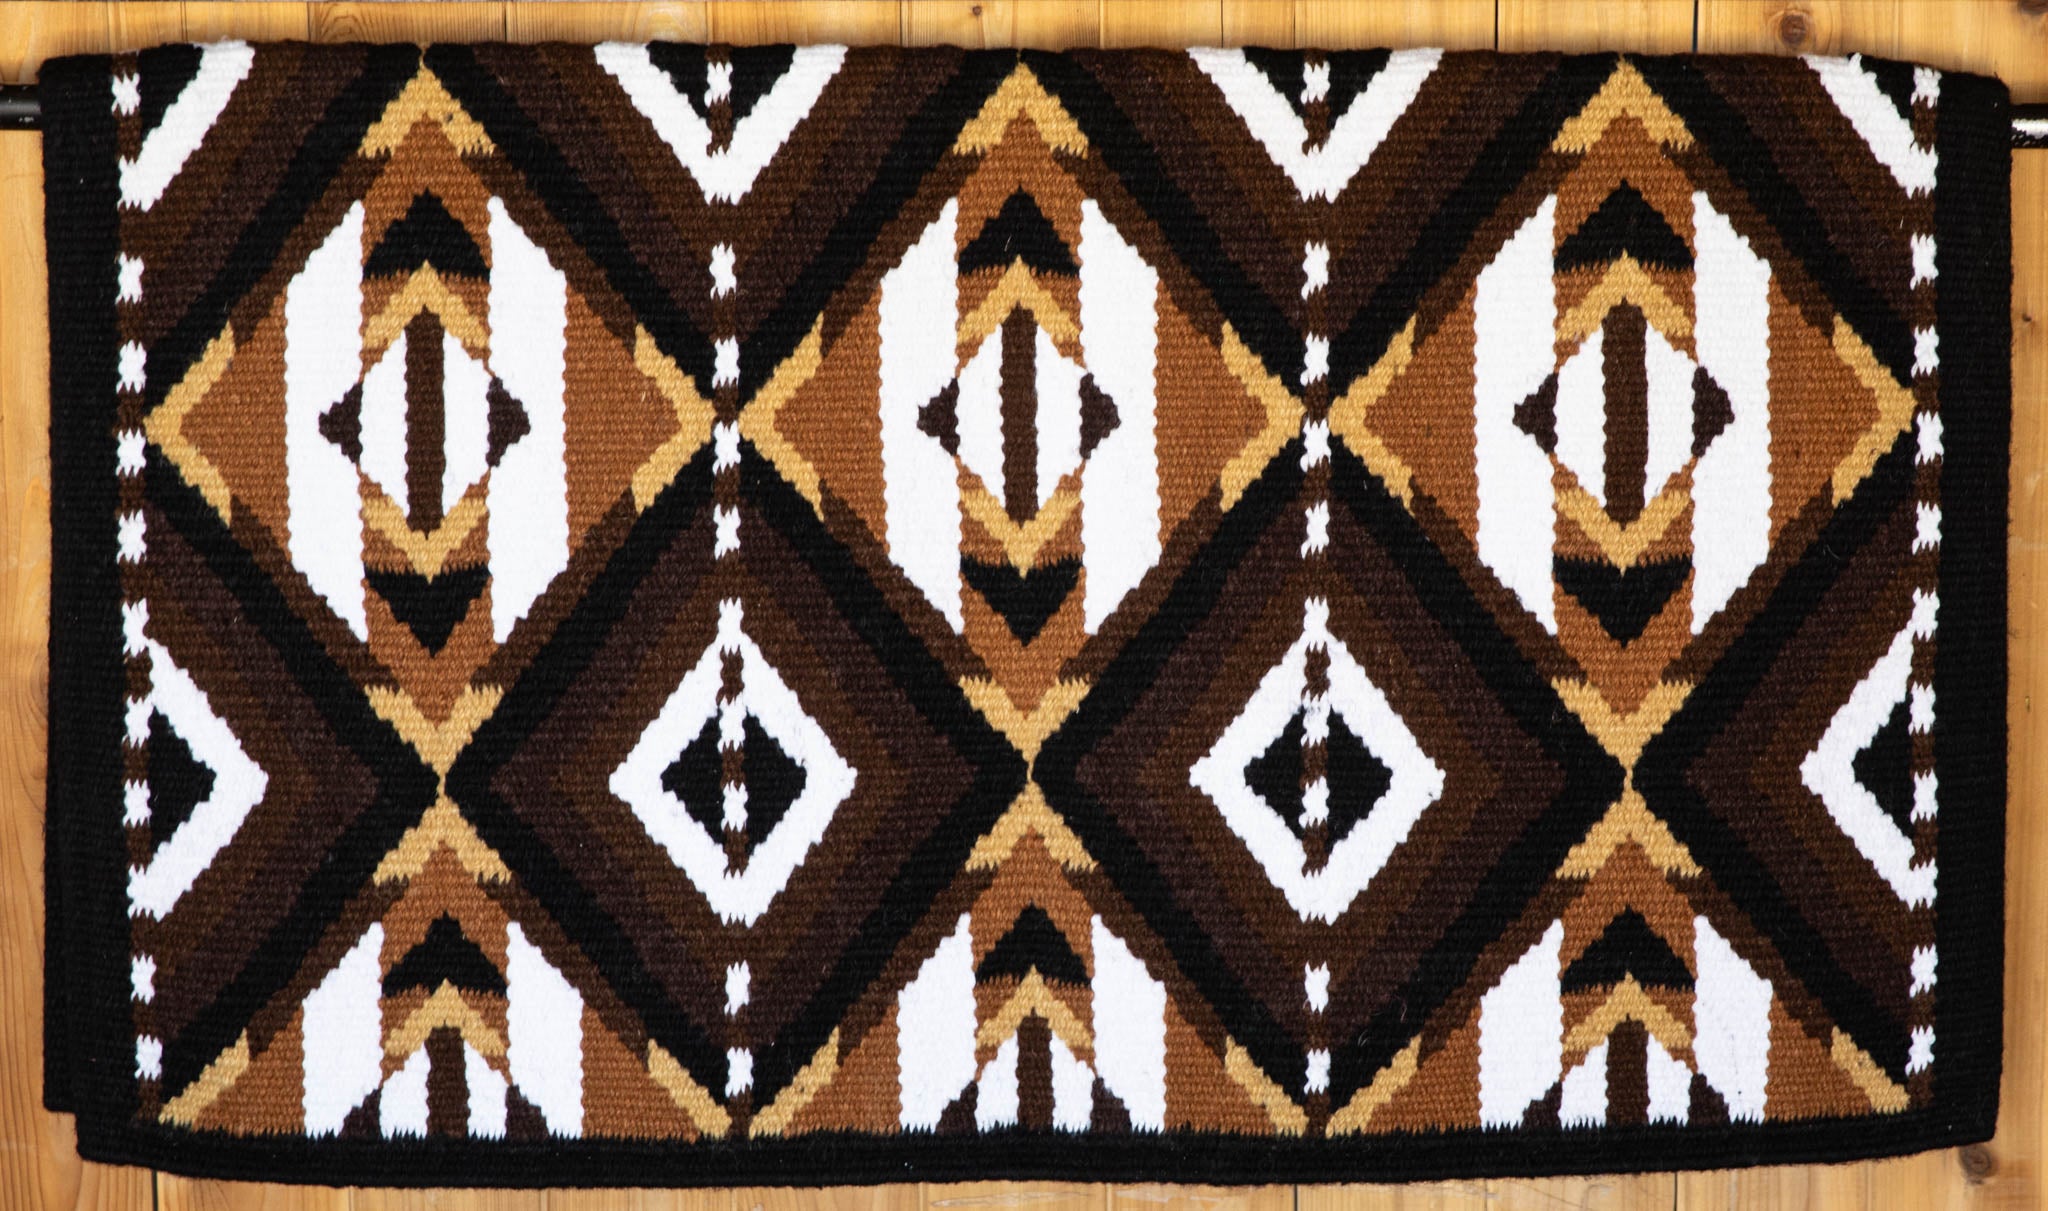 Black, Browns, & Tan w/ White Accents Flat Show Blanket